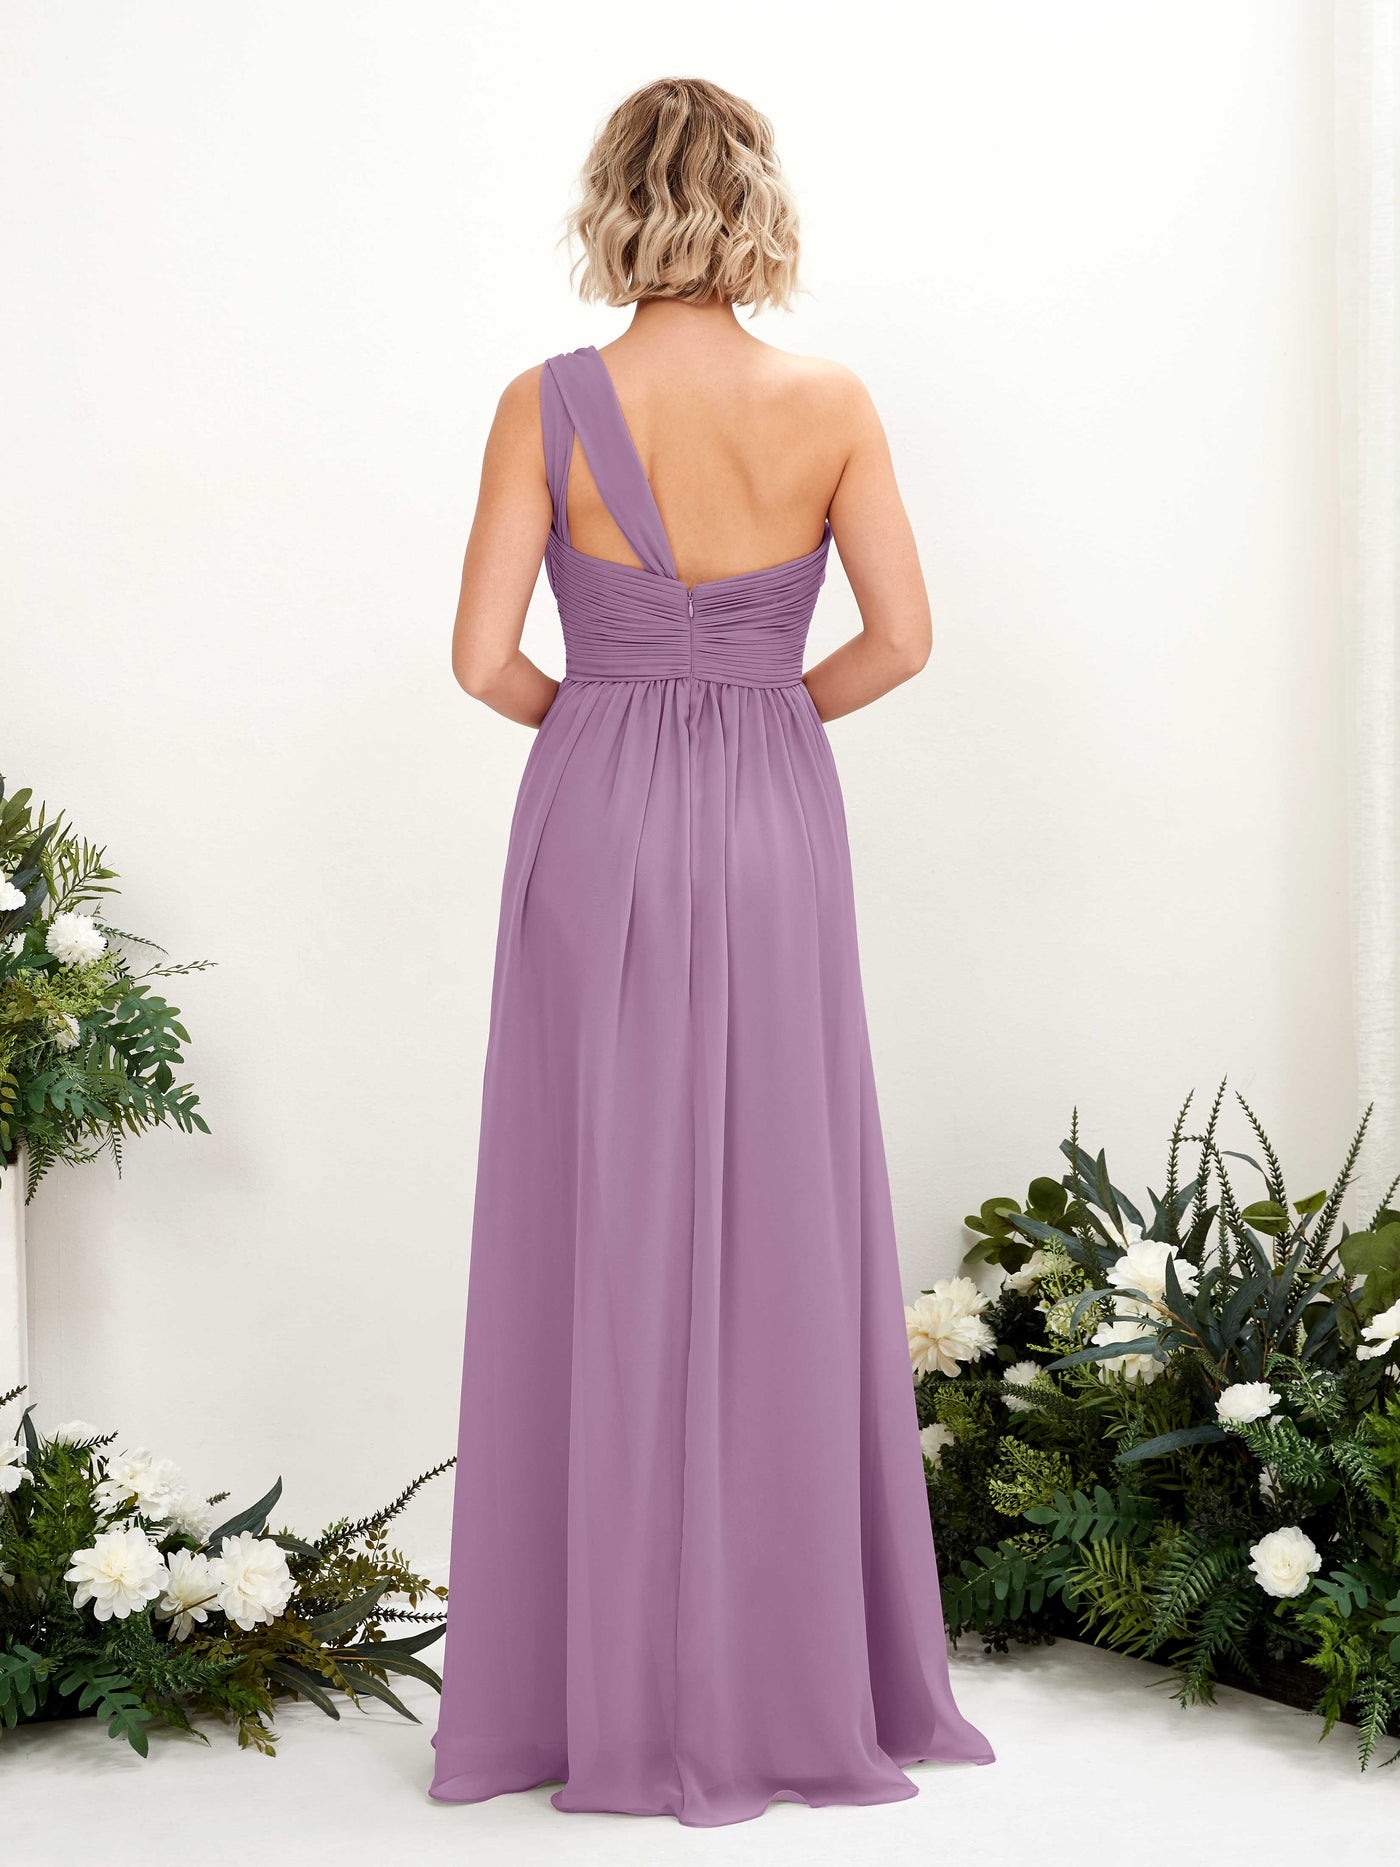 Orchid Mist Bridesmaid Dresses Bridesmaid Dress Ball Gown Chiffon One Shoulder Full Length Sleeveless Wedding Party Dress (81225021)#color_orchid-mist